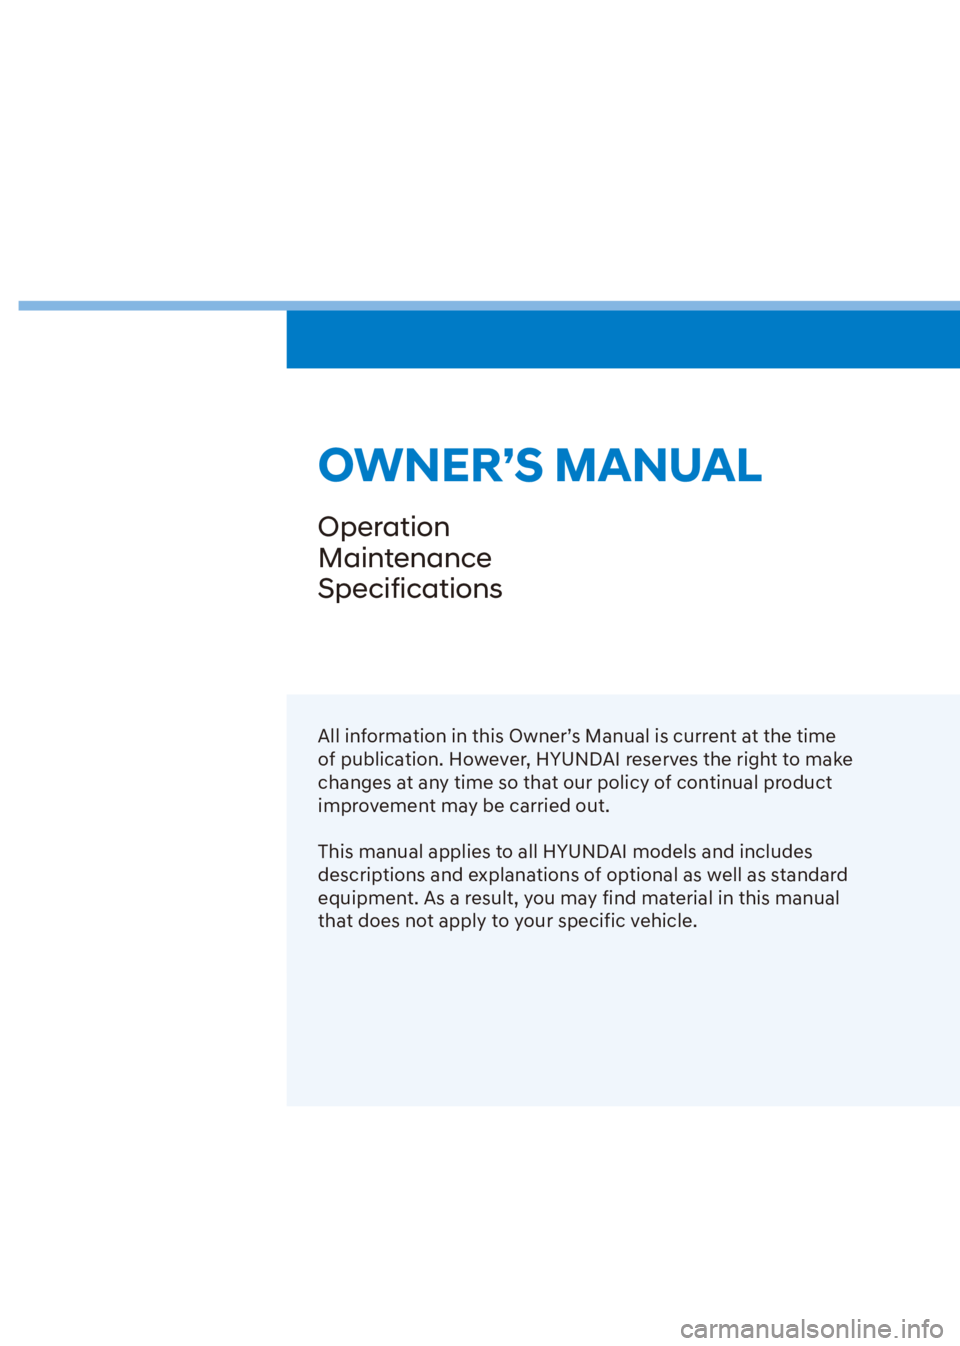 HYUNDAI VENUE 2022  Owners Manual OWNER’S MANUAL
Operation
Maintenance
Specifications
All information in this Owner’s Manual is current at the time 
of publication. However, HYUNDAI reserves the right to make 
changes at any time 